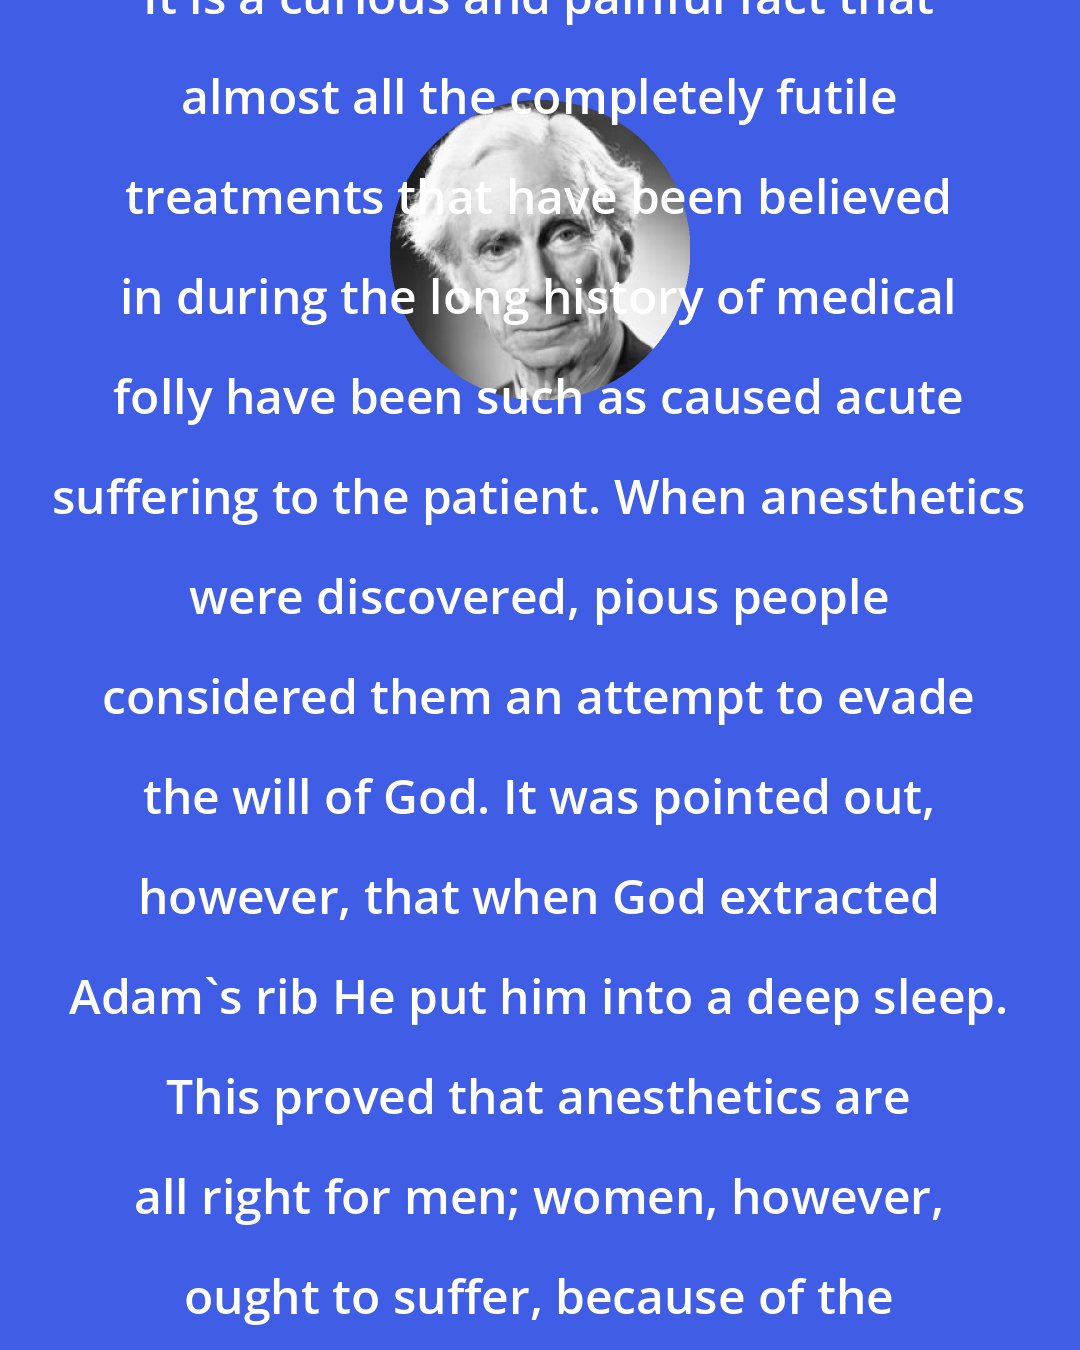 Bertrand Russell: It is a curious and painful fact that almost all the completely futile treatments that have been believed in during the long history of medical folly have been such as caused acute suffering to the patient. When anesthetics were discovered, pious people considered them an attempt to evade the will of God. It was pointed out, however, that when God extracted Adam's rib He put him into a deep sleep. This proved that anesthetics are all right for men; women, however, ought to suffer, because of the curse of Eve.